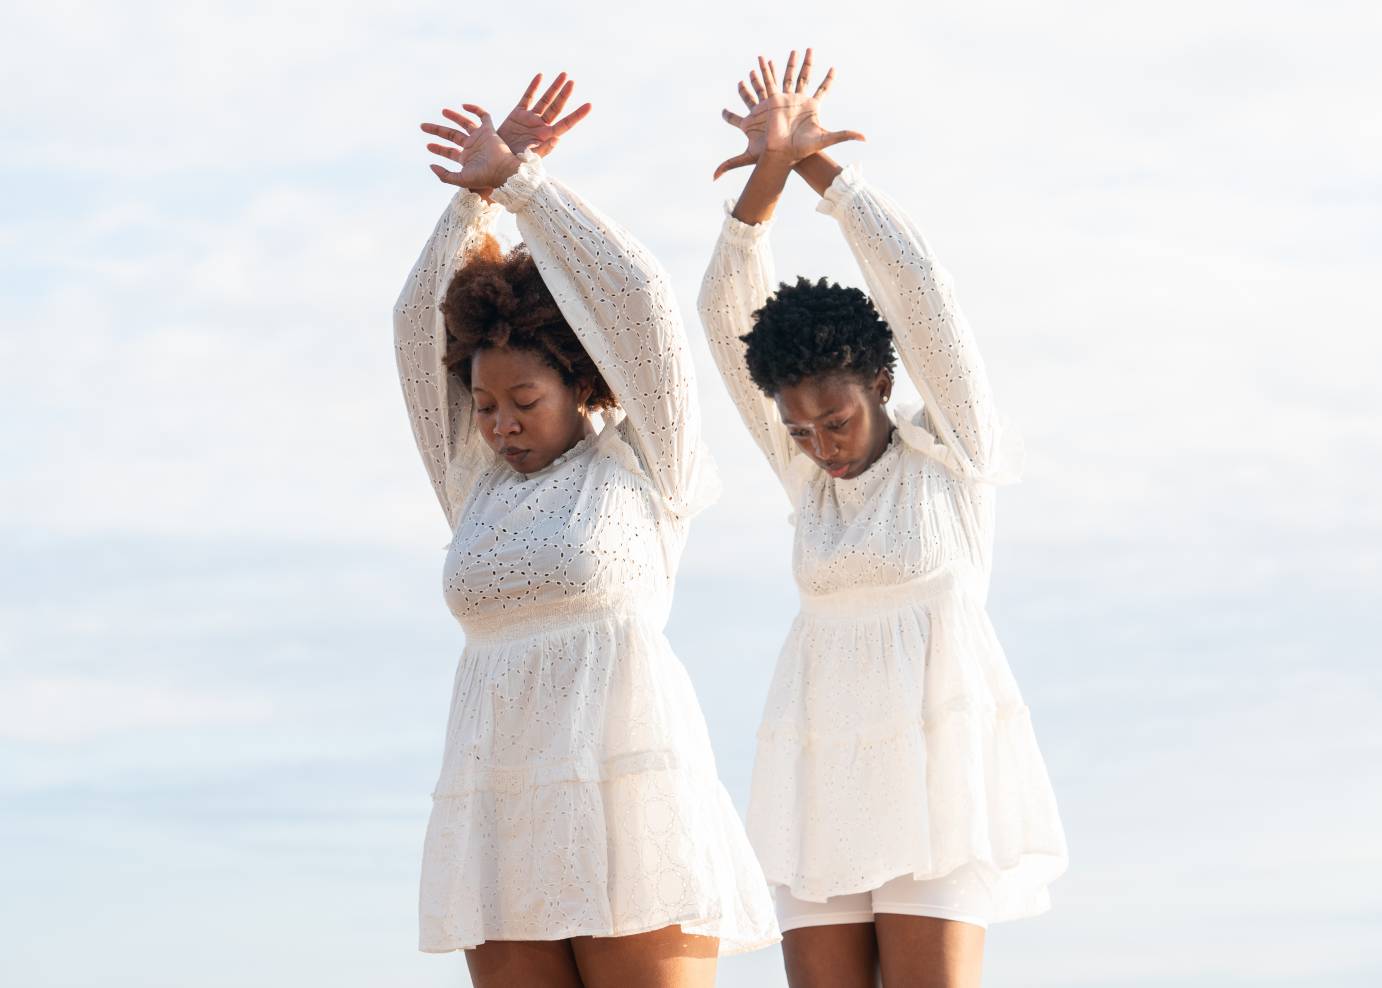 Two Black women wear long-sleeved, white lace dresses. Kate Louissaint is to Nhyira Oforiwaa Asante's left. While looking down, their arms are lifted above their head, wrists crossed